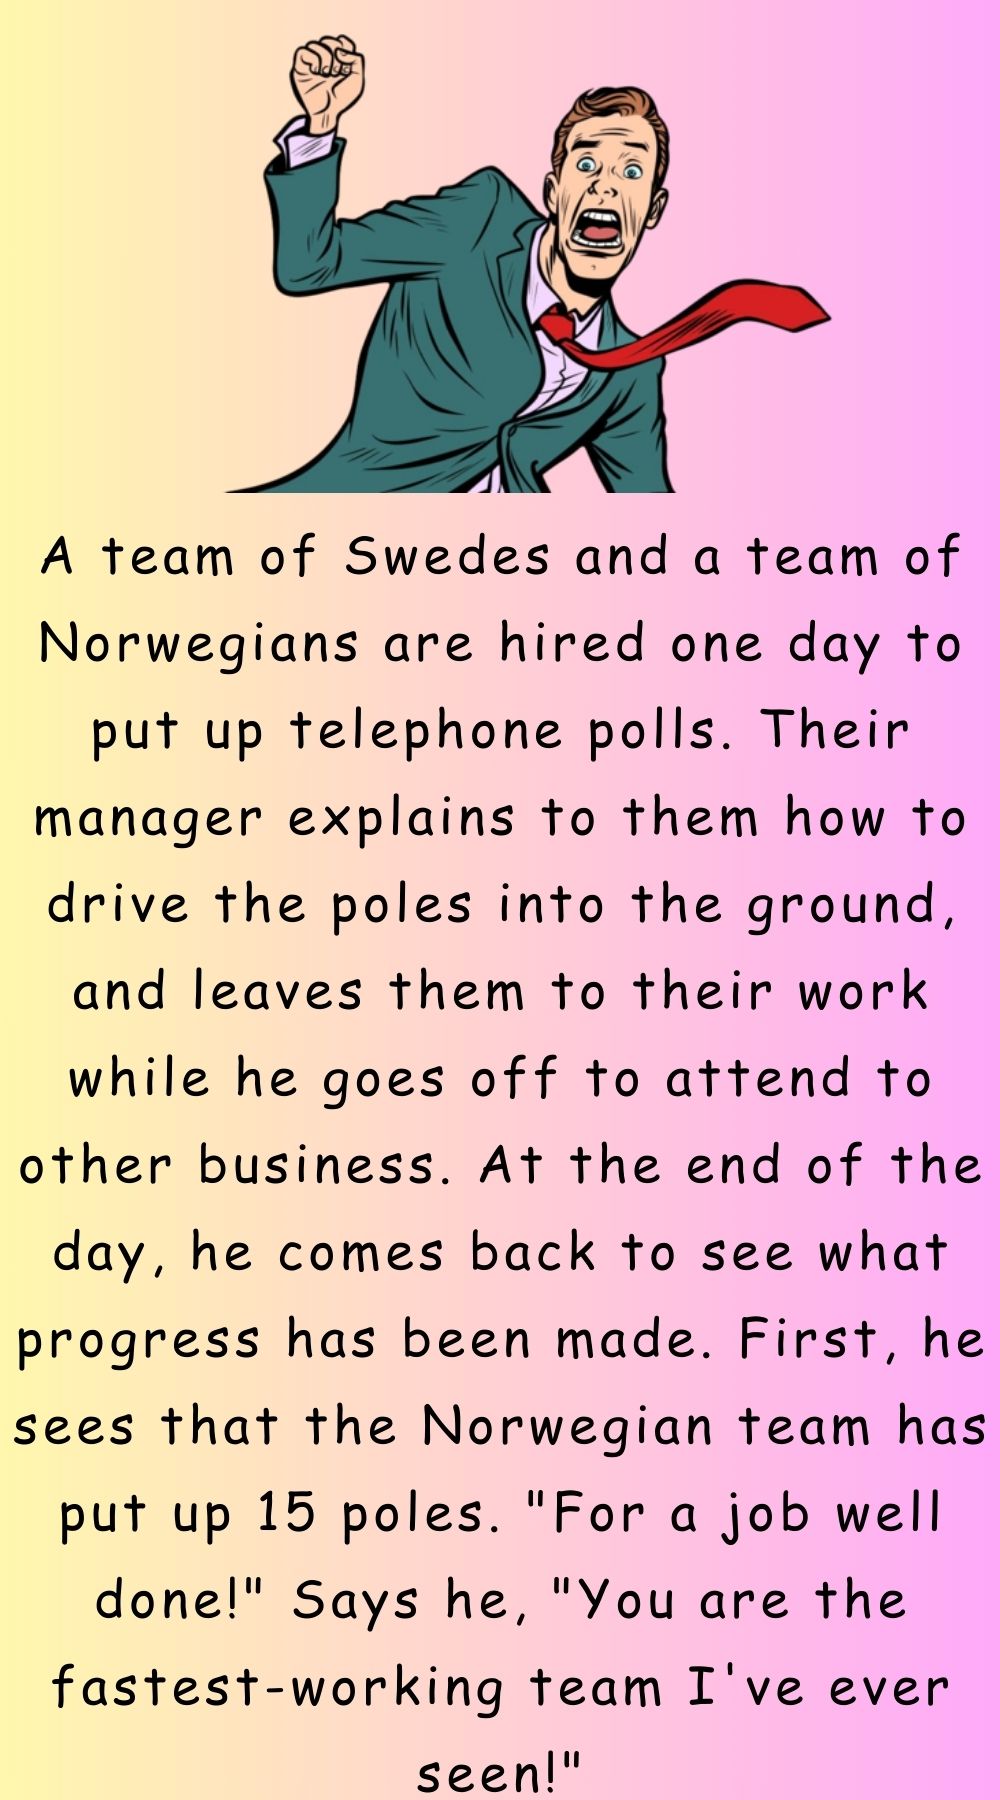 A team of Swedes and a team of Norwegians